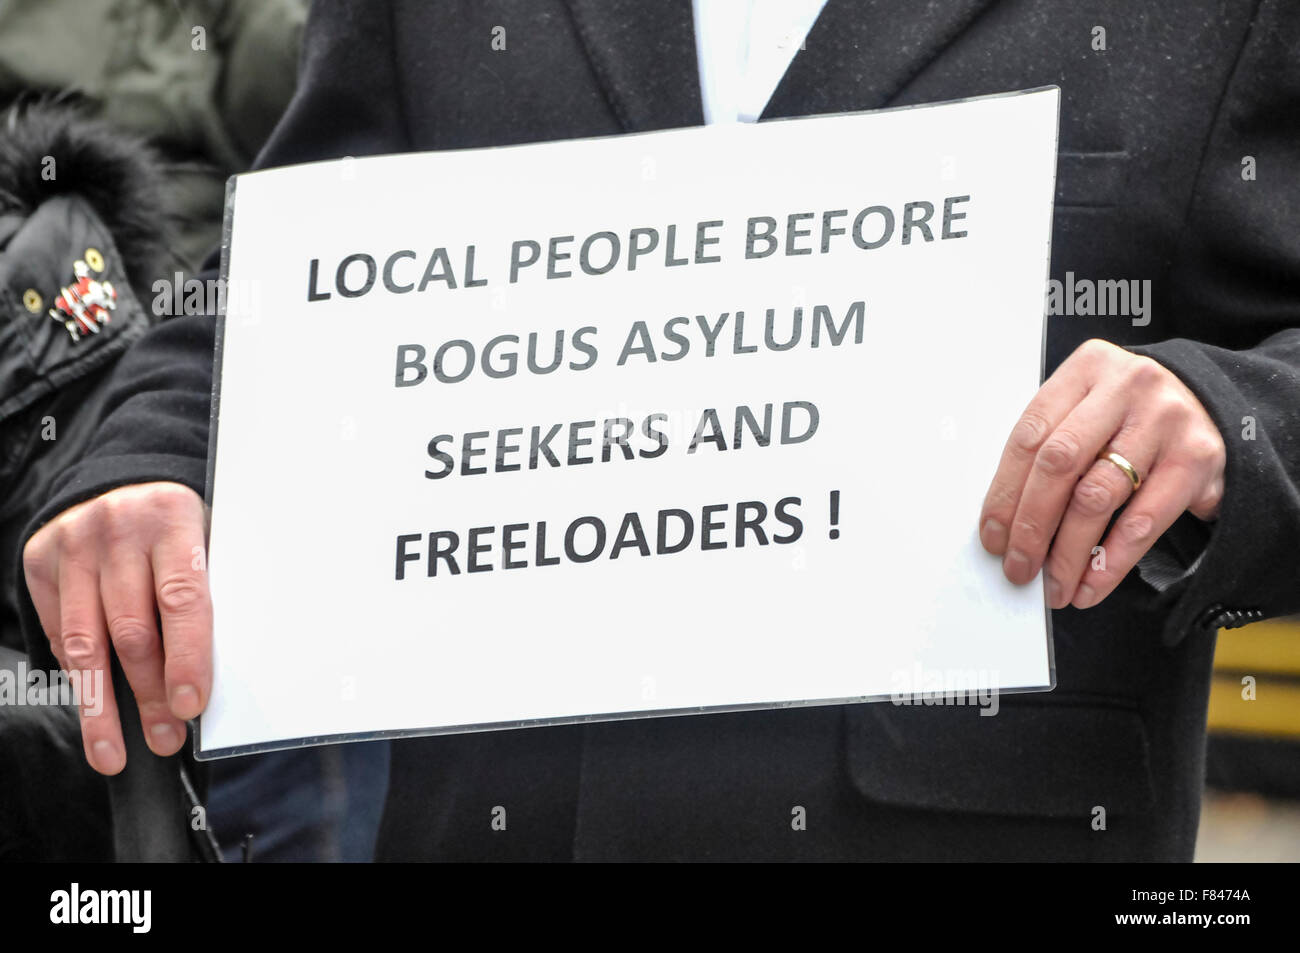 Belfast, Northern Ireland. 05 Dec 2015 - A man holds a poster saying 'Local people before bogus asylum seekers and freeloaders!' as the Protestant Coalition hold a protest against Islamic refugees coming to Northern Ireland. Credit:  Stephen Barnes/Alamy Live News Stock Photo